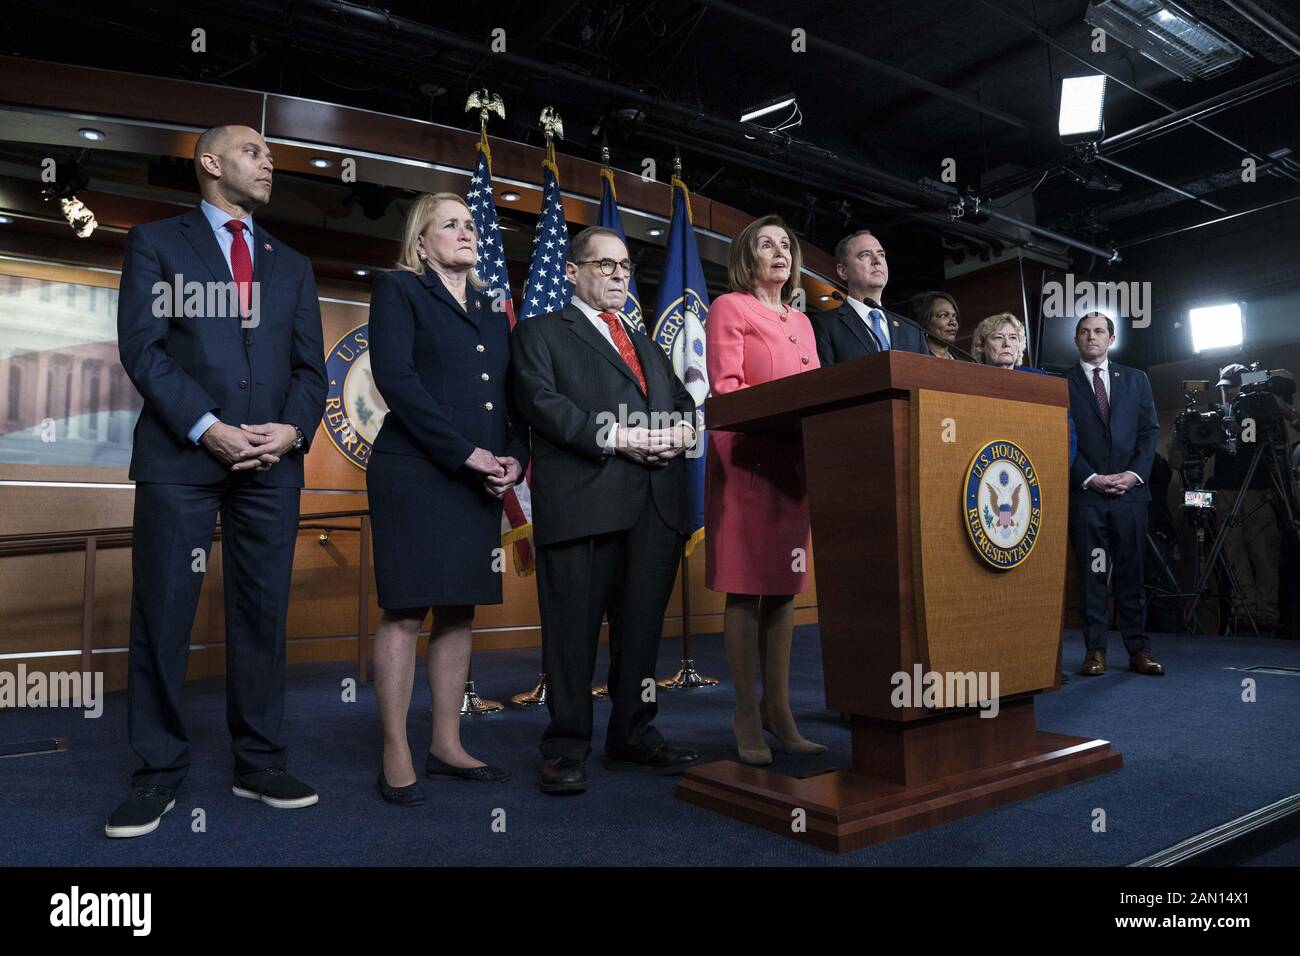 Washington, United States. 15th Jan, 2020. Speaker of the House Nancy Pelosi, D-Calif., announces the impeachment managers, members of the House who will serve as prosecutors in the Senate impeachment trial of President Trump, in the the U.S. Capitol Building in Washington, DC on Wednesday, January 15, 2020. Credit: UPI/Alamy Live News Stock Photo